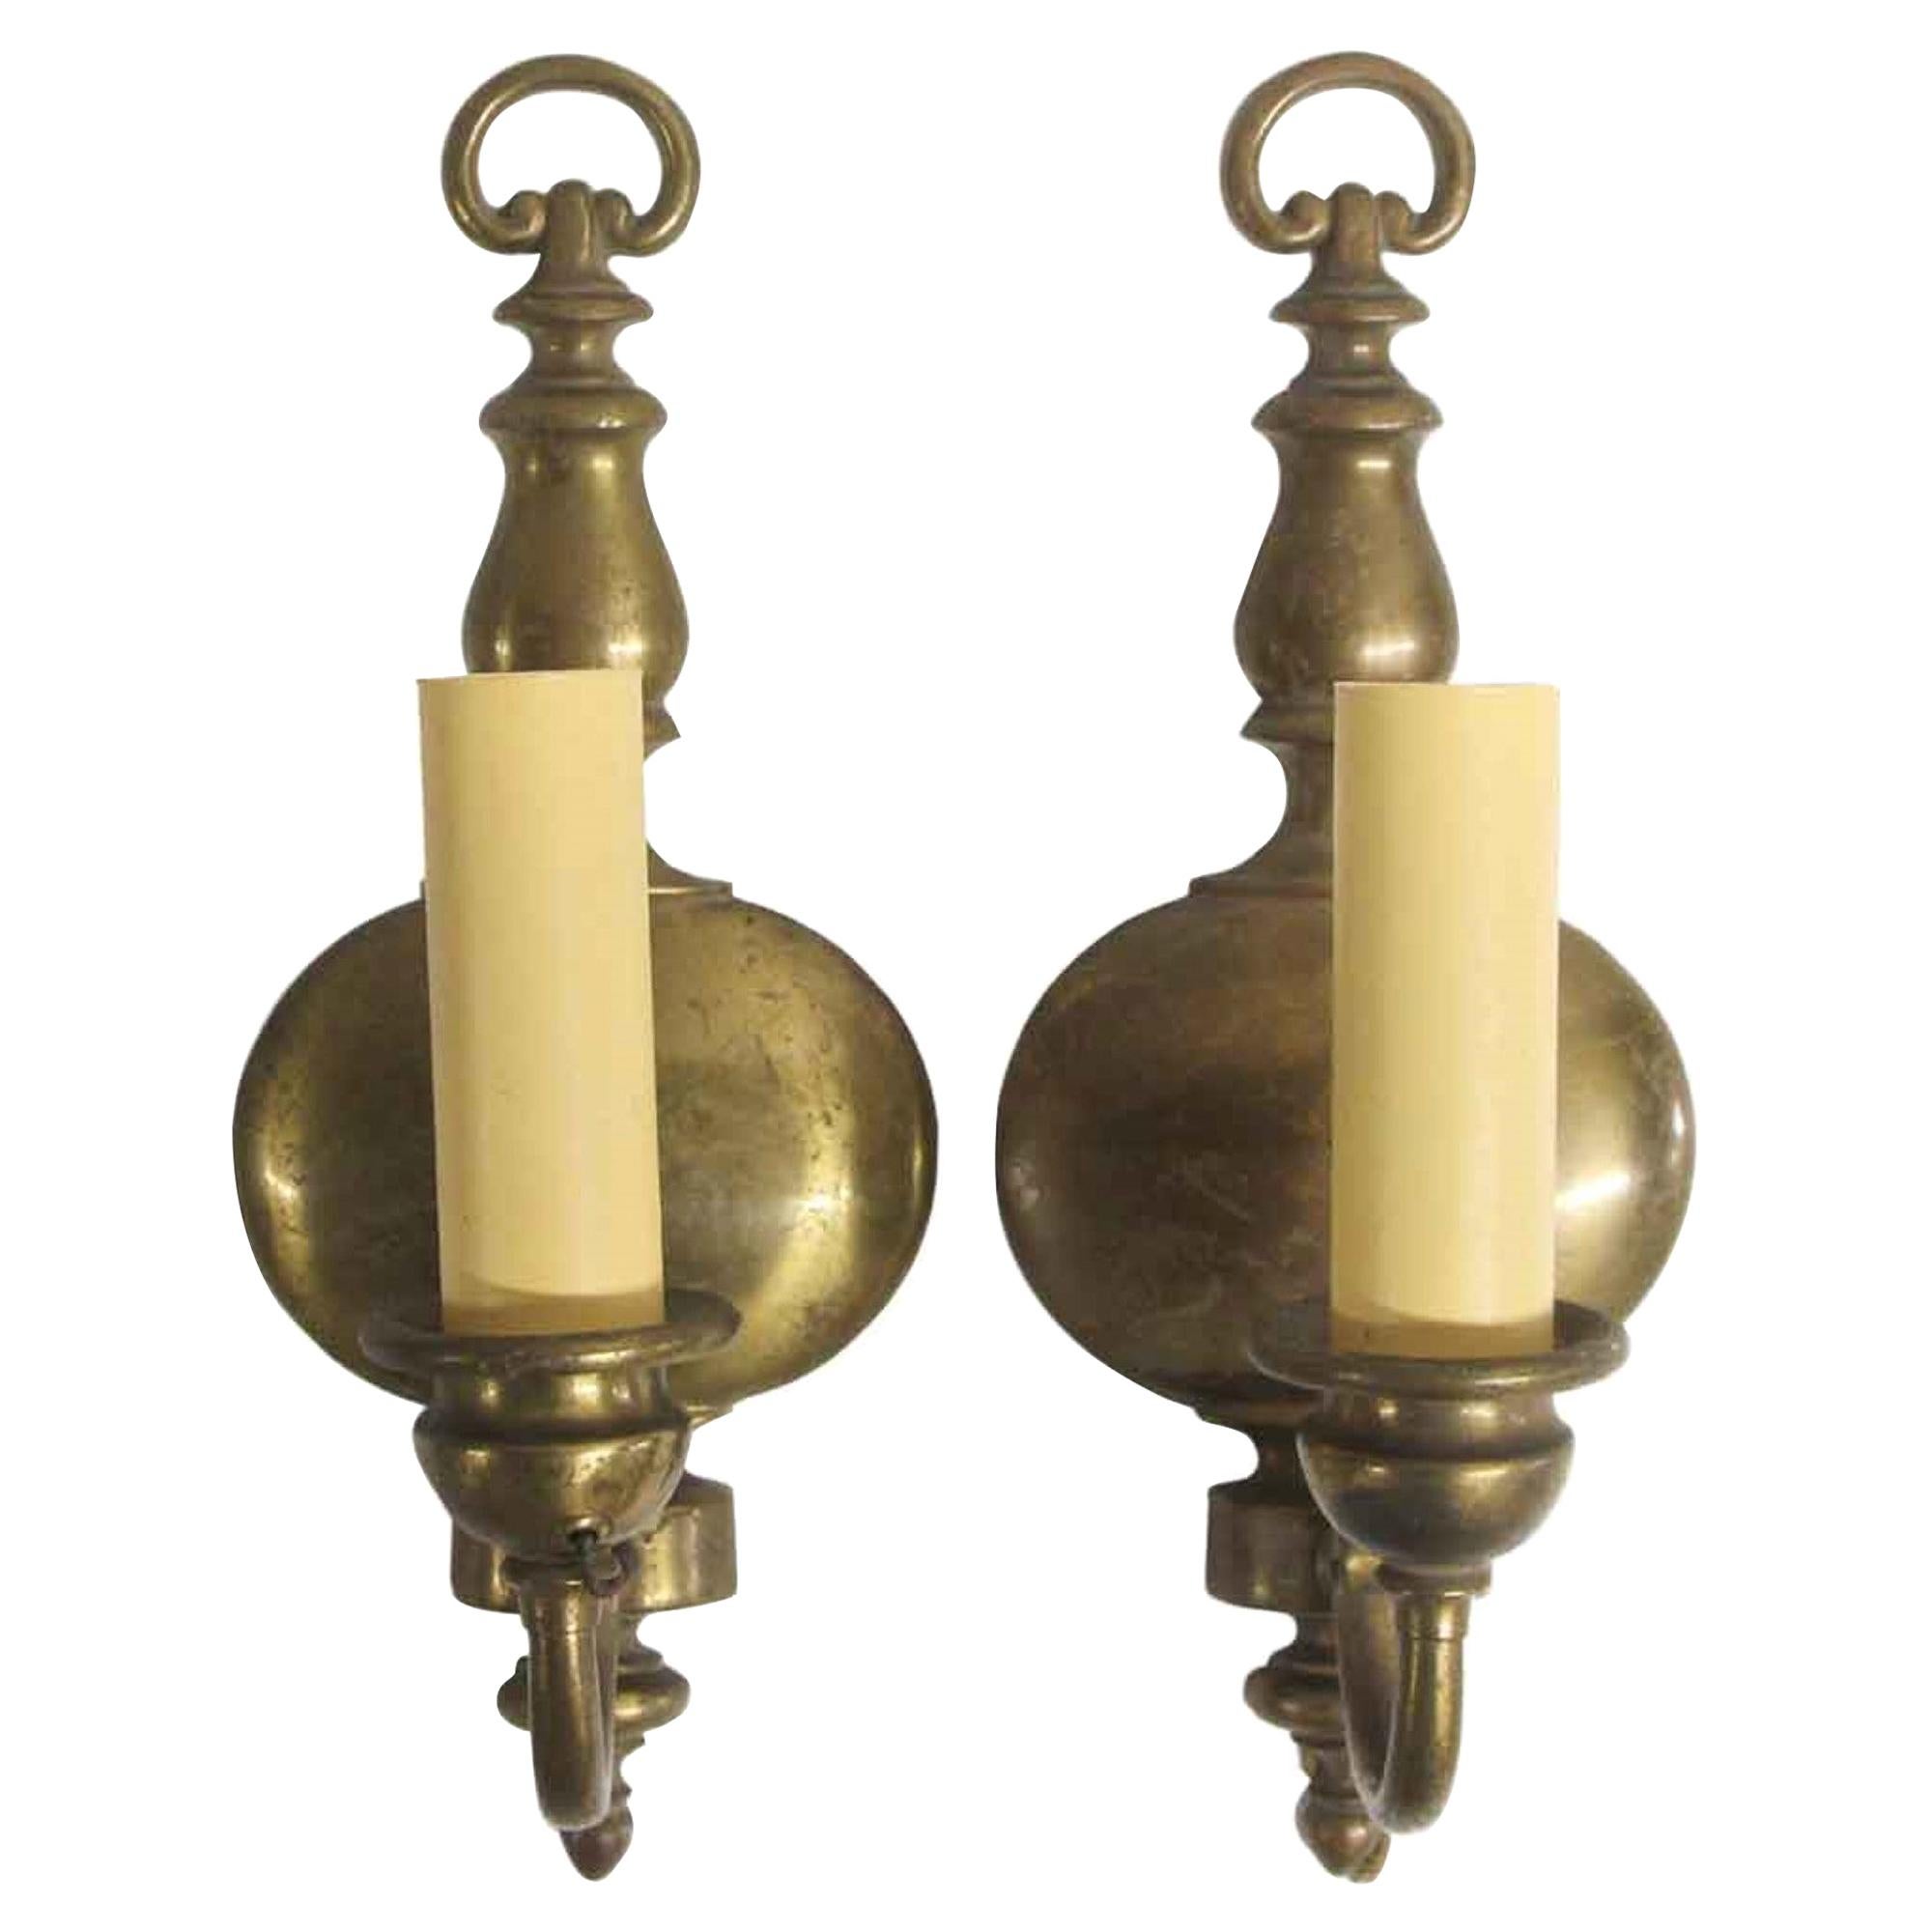 1920s Pair of Antique Brass Federal Wall Sconces with a Single Light Each